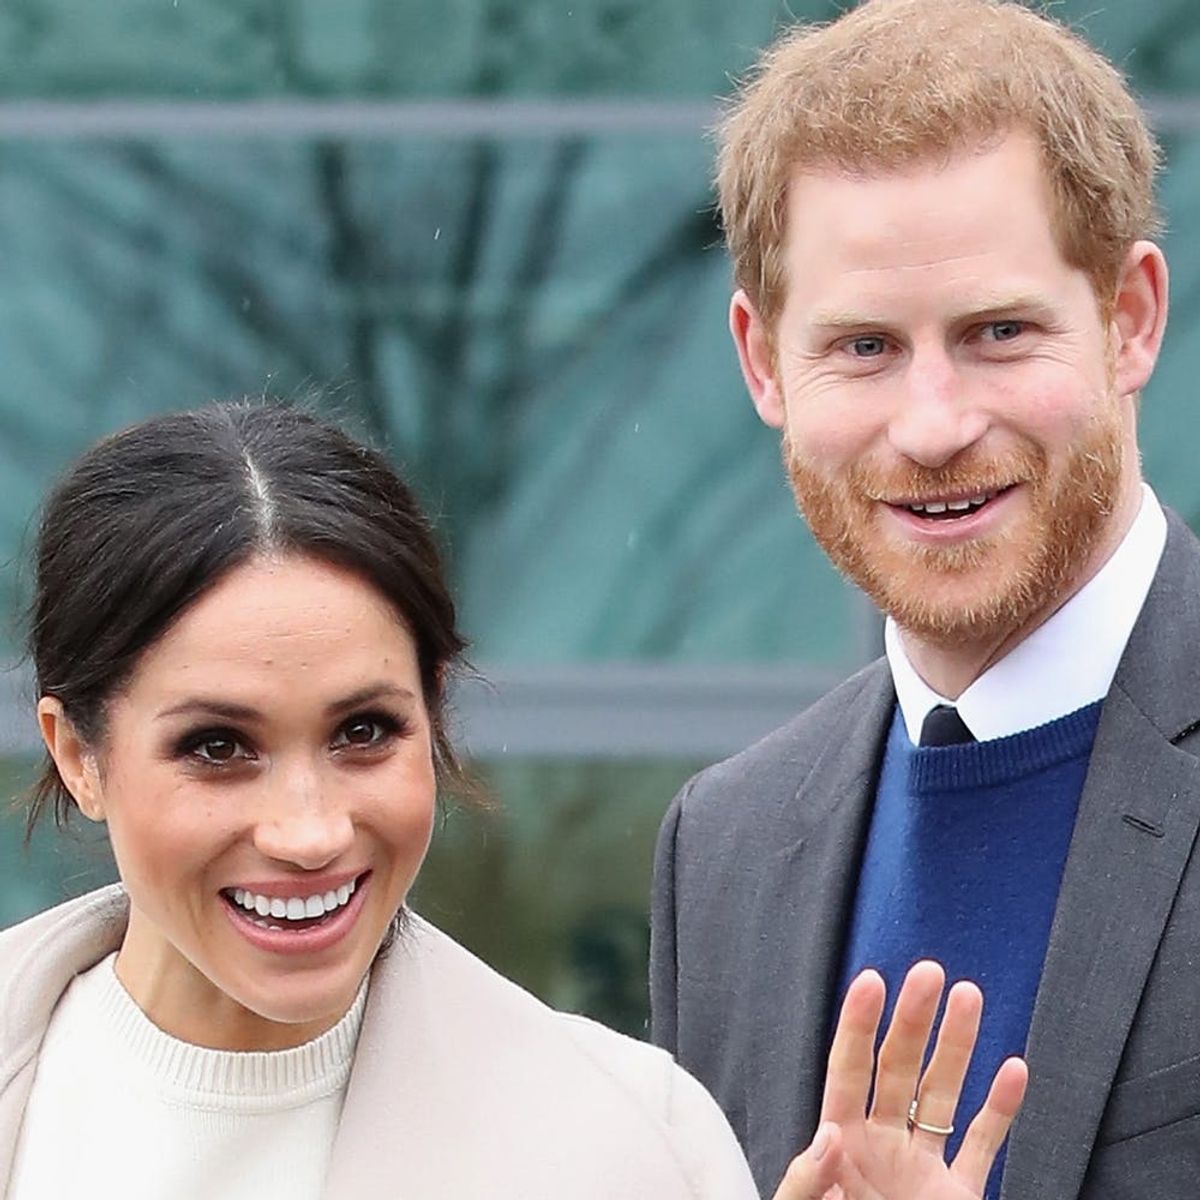 Here’s Why Everyone Thinks Prince Harry and Meghan Markle’s Wedding Invitations Have a Typo